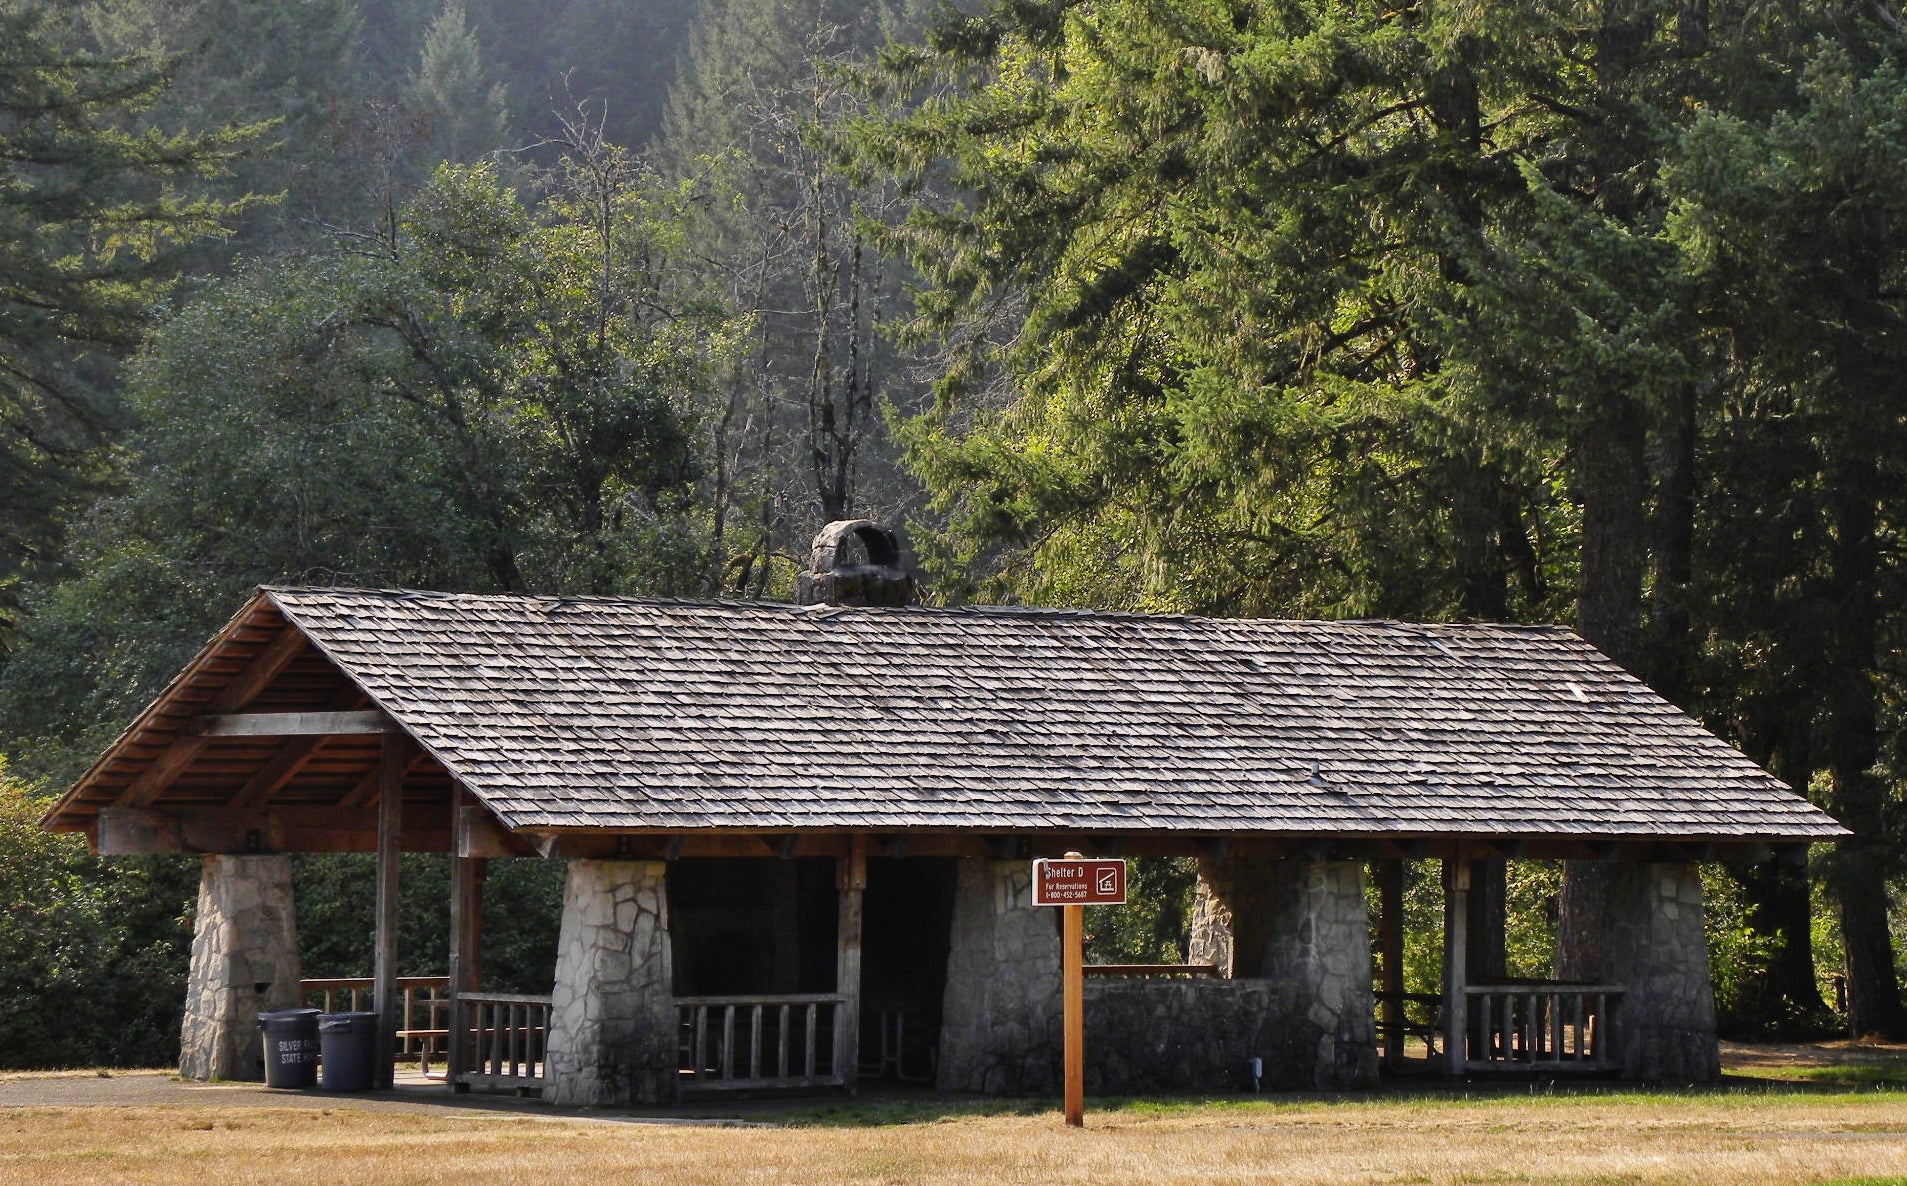 The picnic shelter is close to the trailhead of South Falls.